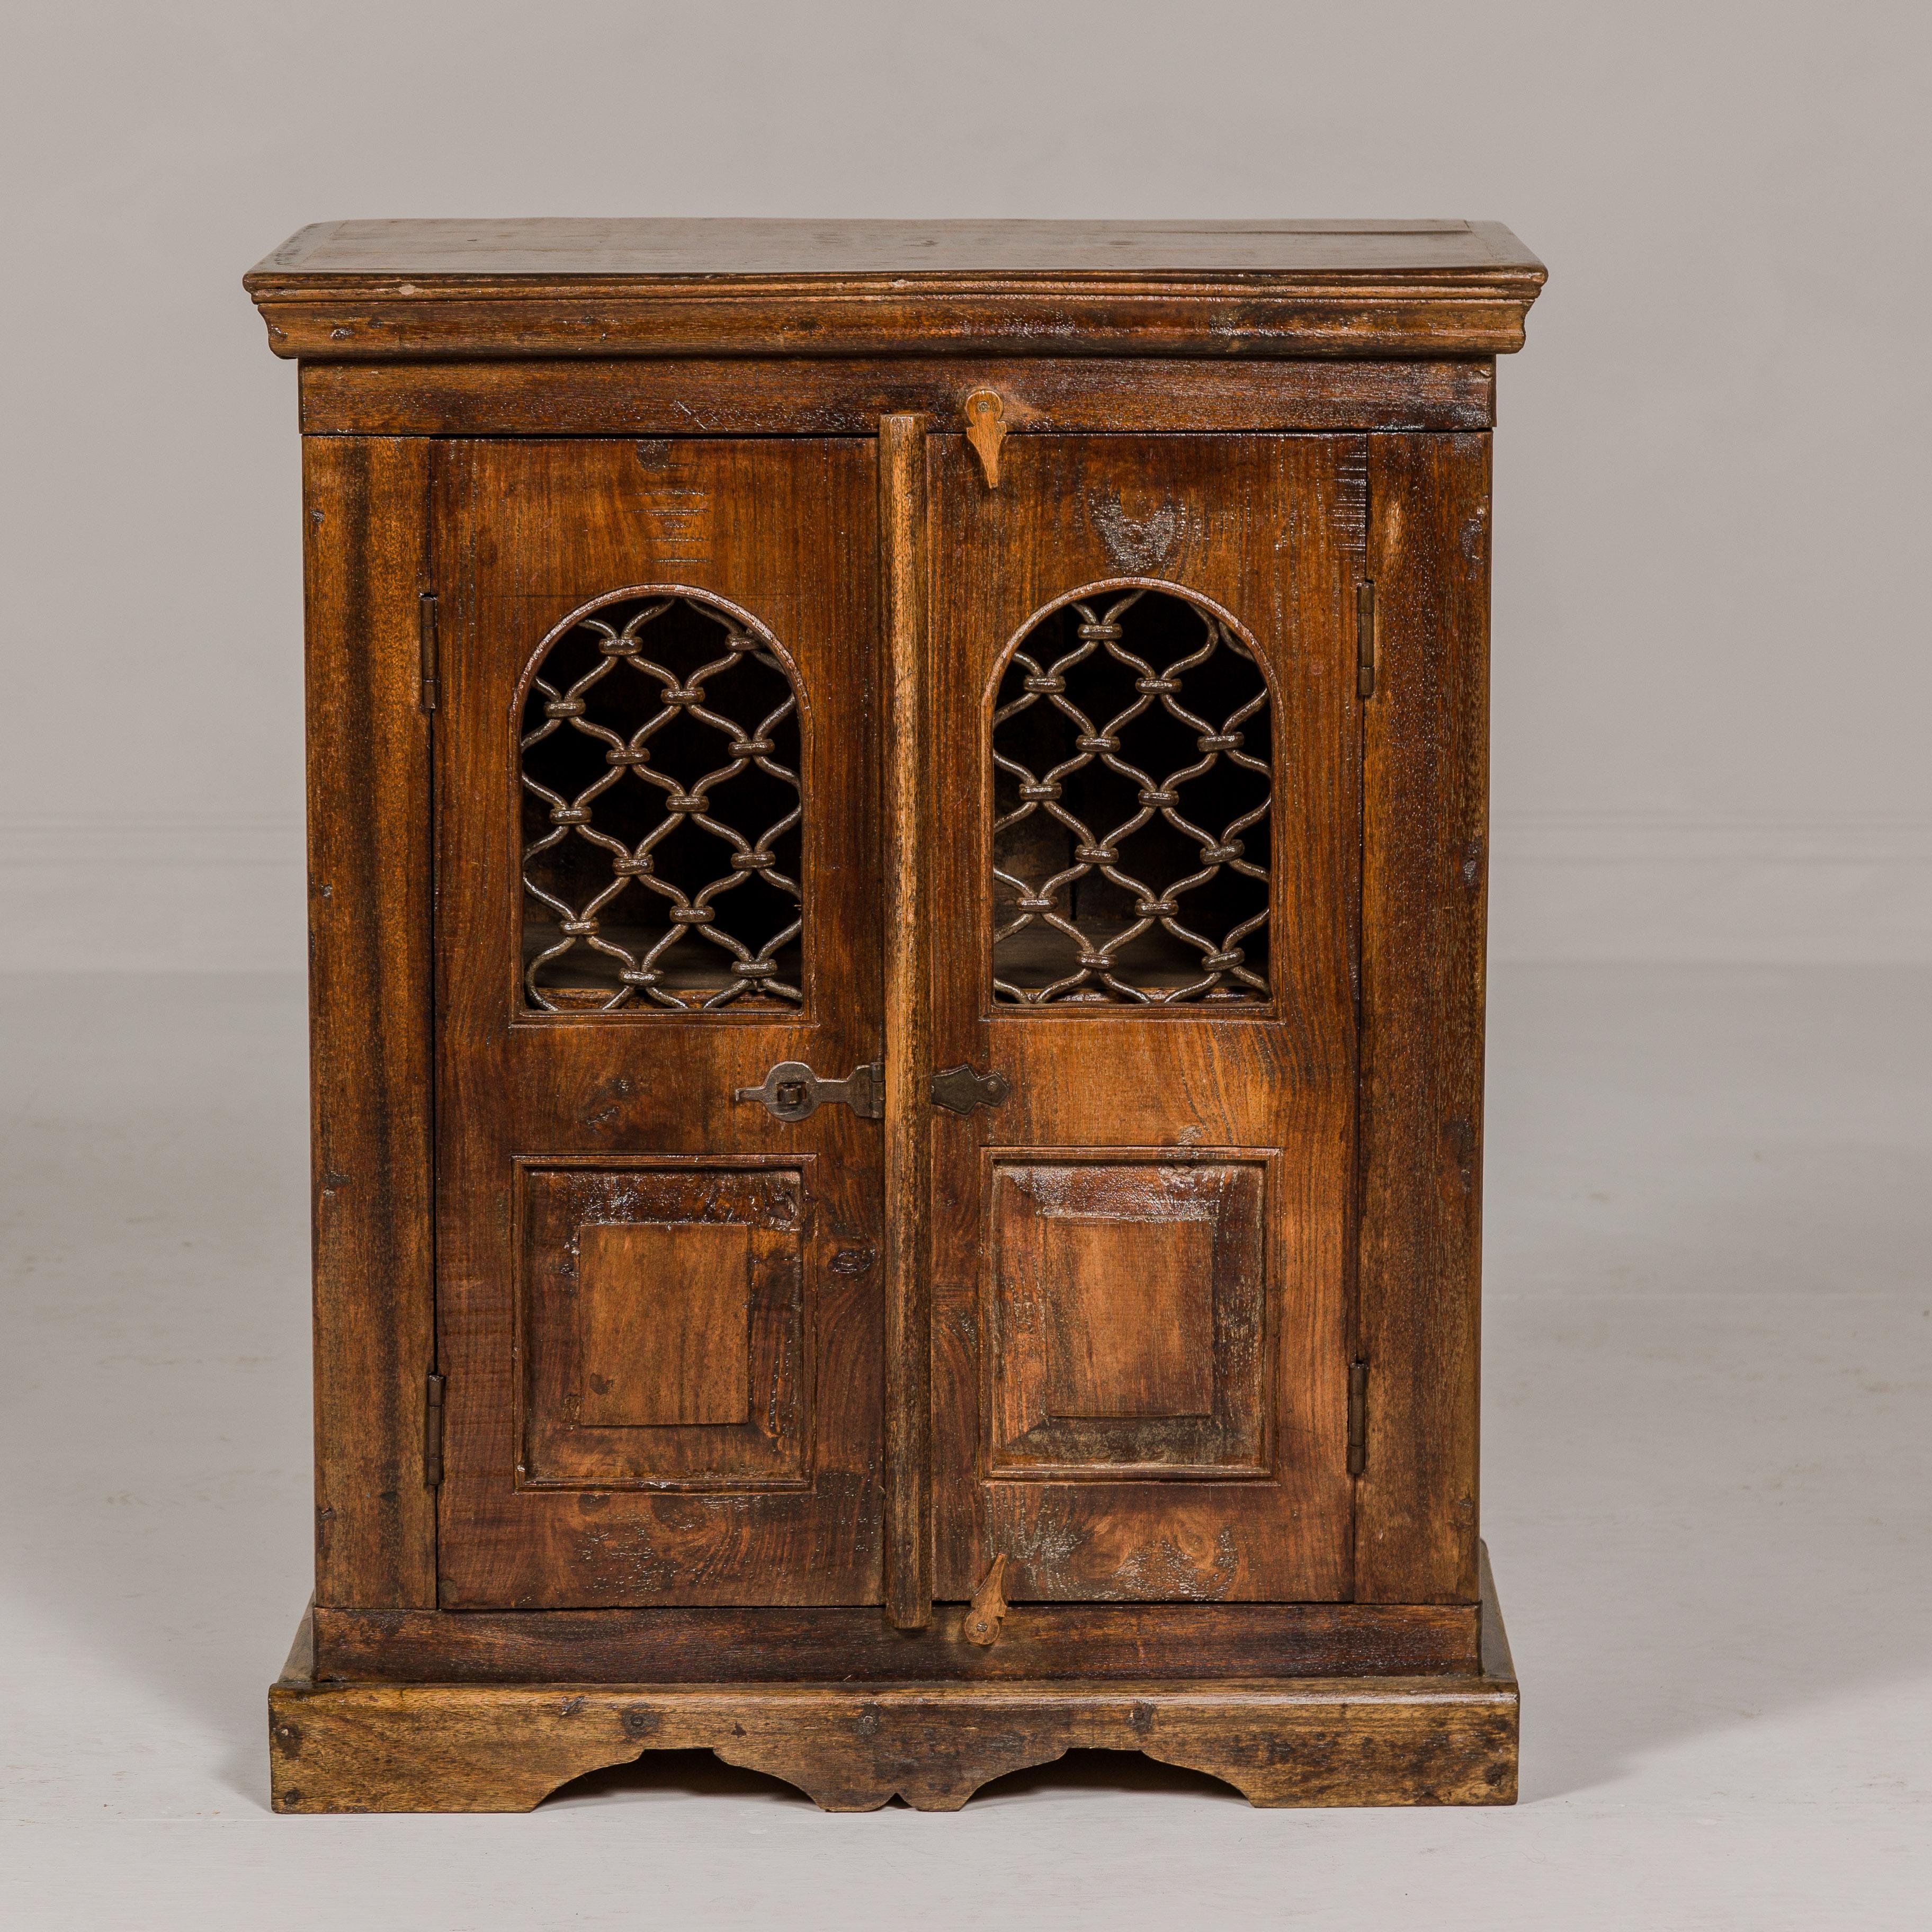 An Indian wooden side cabinet from the 19th century with arched metal grate window door and bracketed plinth. This 19th-century Indian wooden side cabinet is a splendid artifact that marries traditional craftsmanship with functional design. The